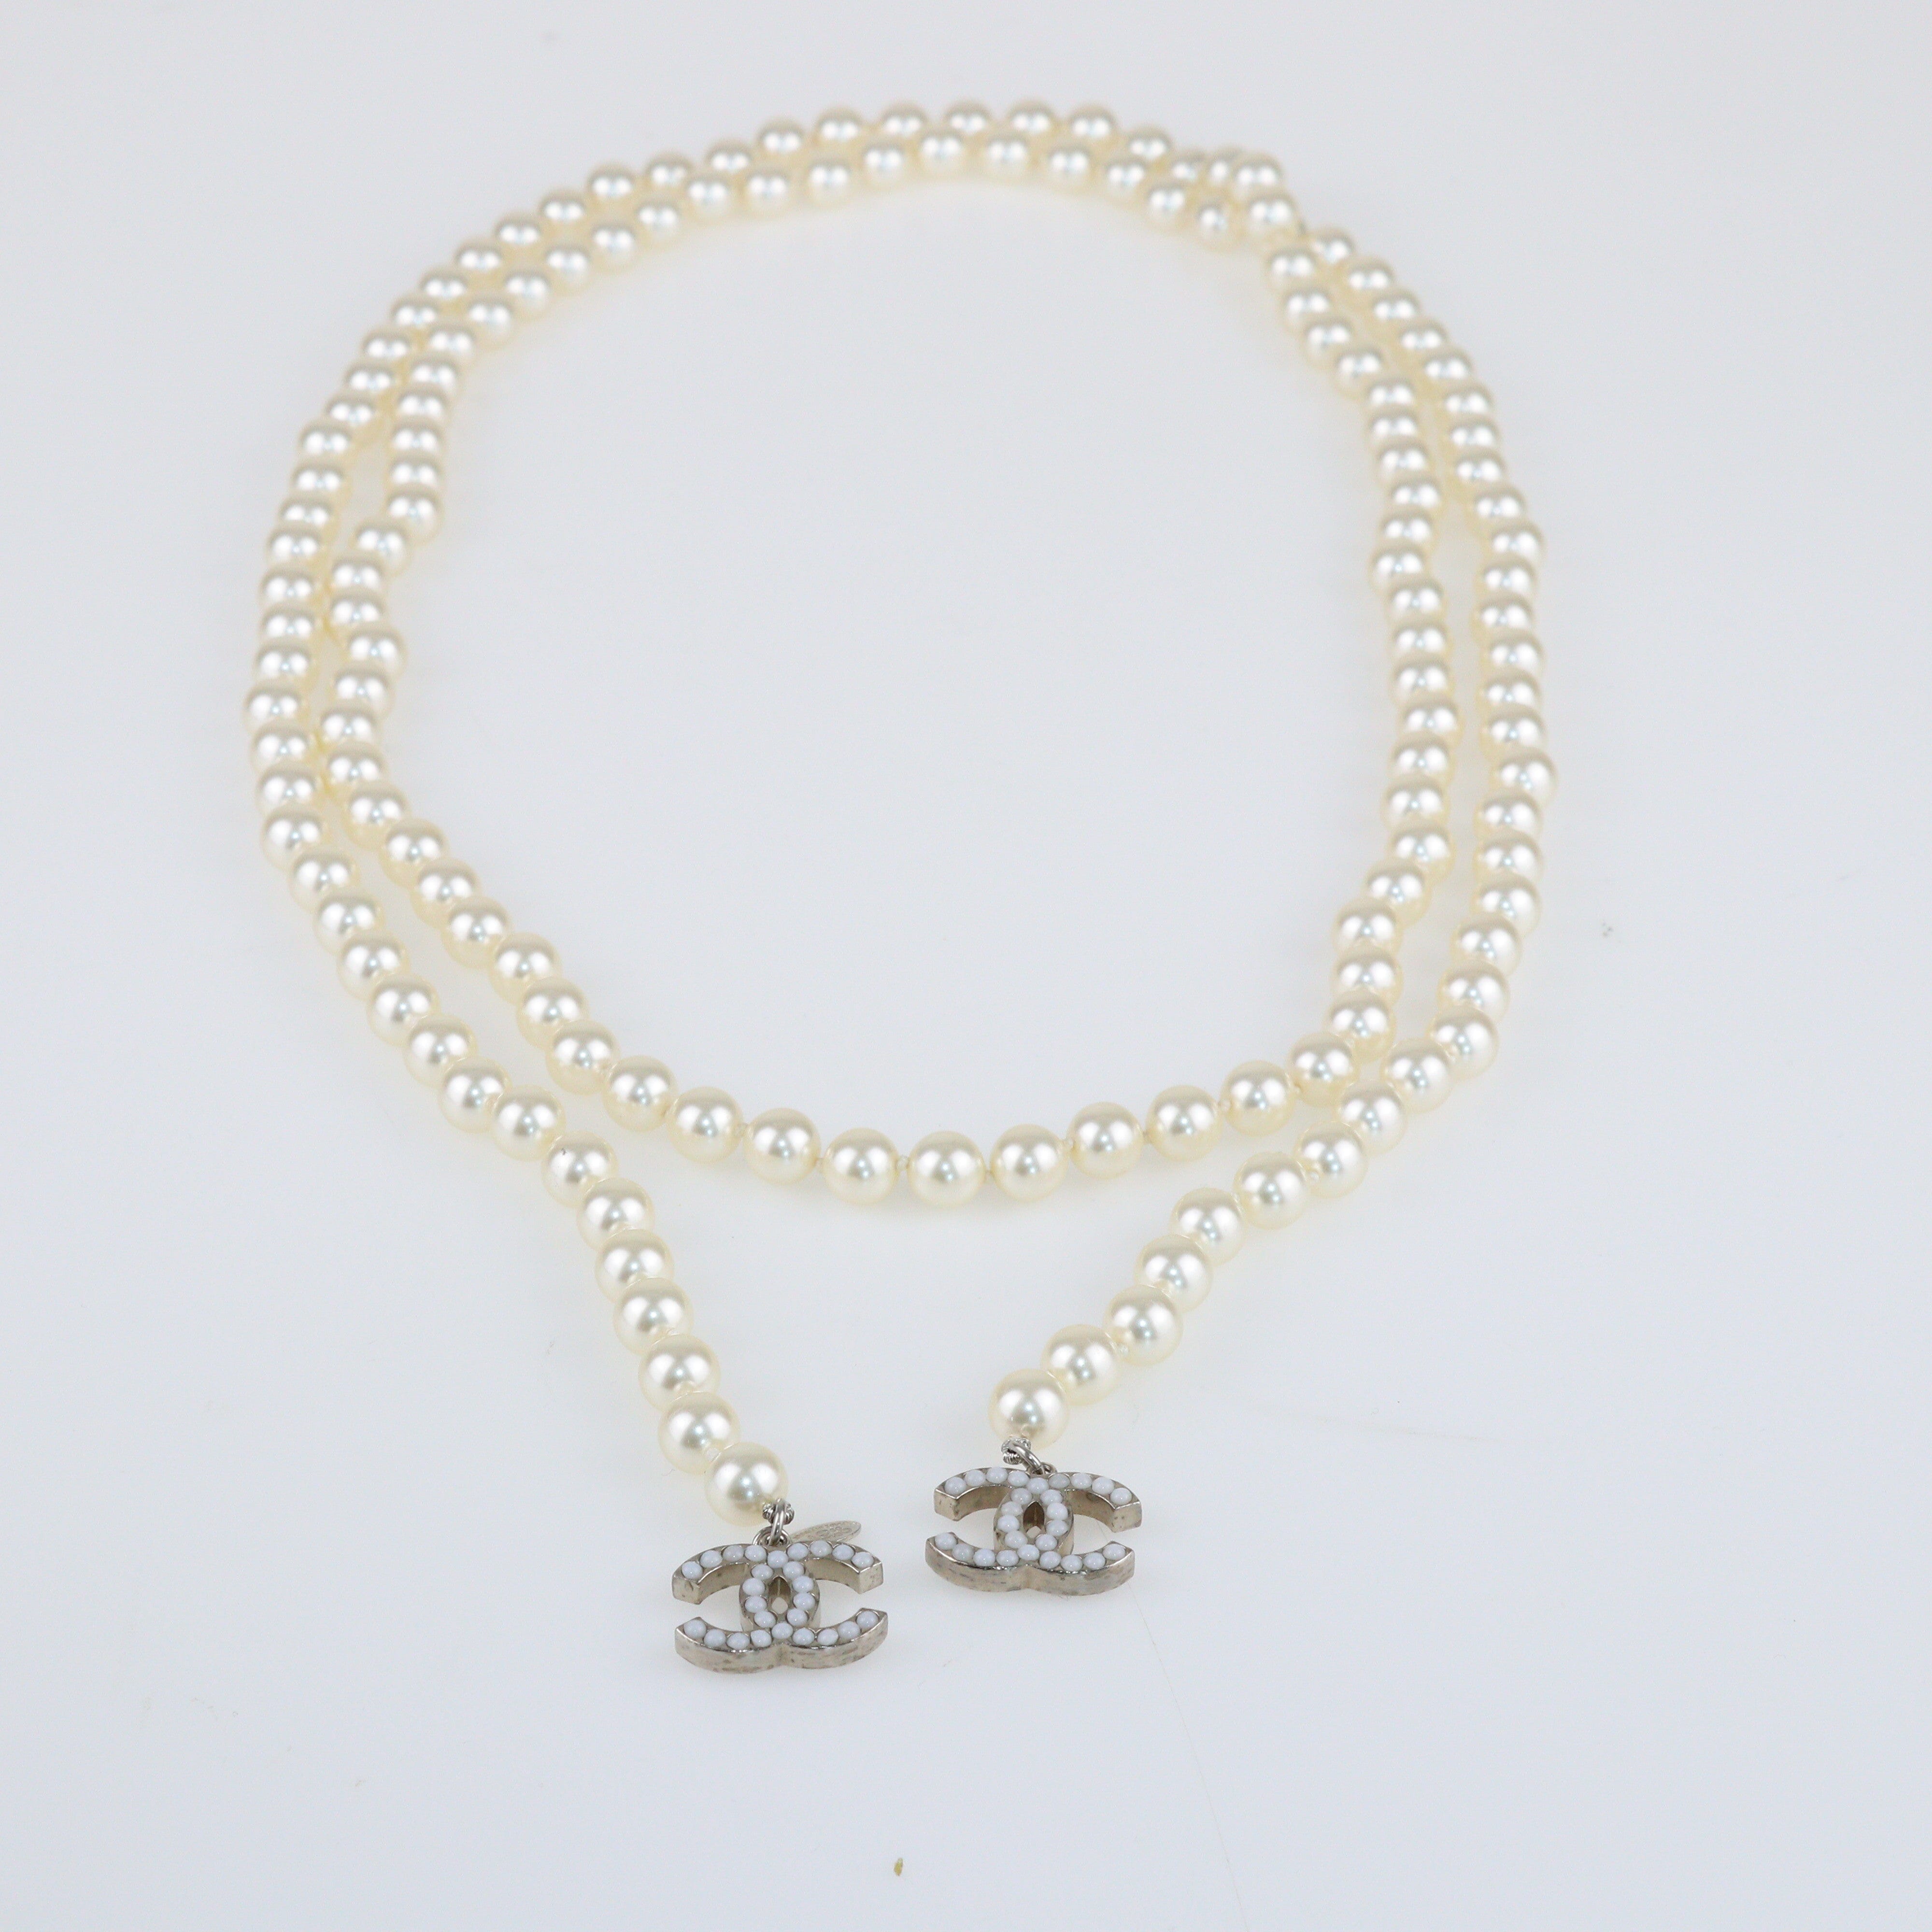 White Pearl Beads String Wrap Around Necklace Accessories Chanel 